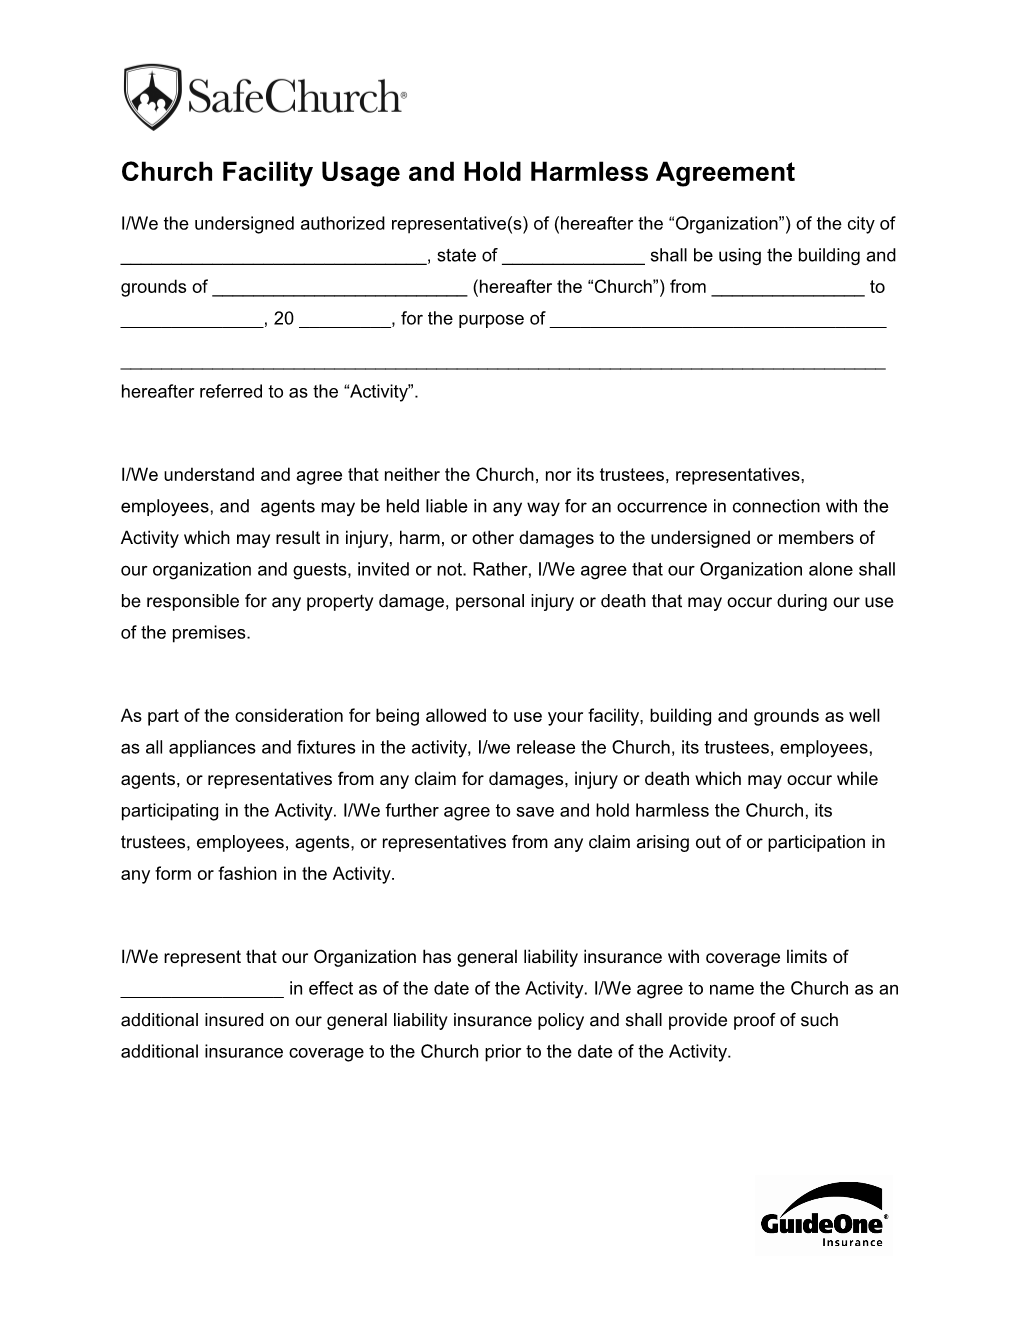 Church Usage and Hold Harmless Agreement (Fill in Form)